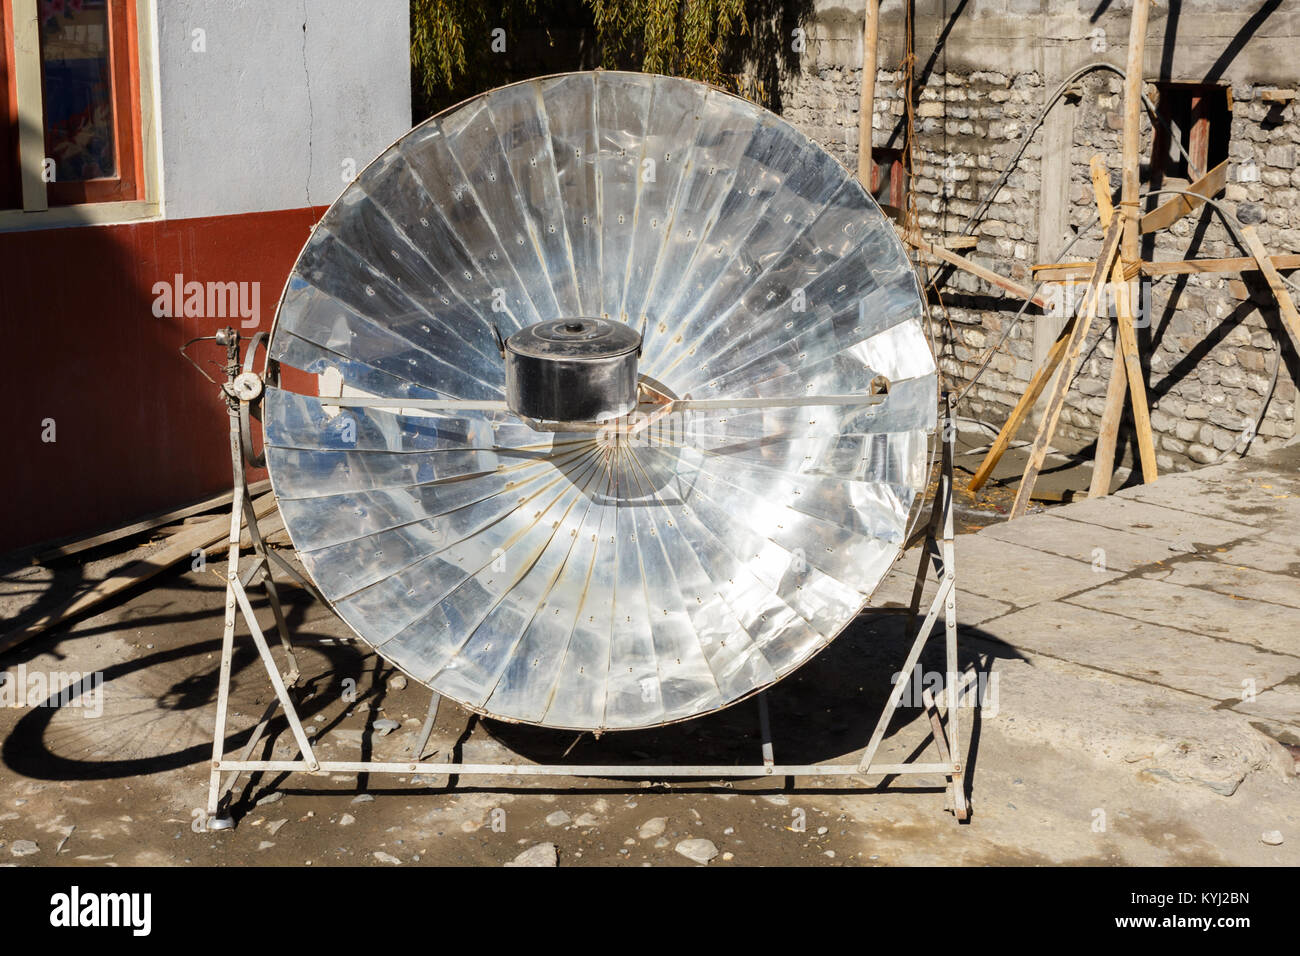 Eco-friendly solar heater for boiling water Himalayas, Nepal Stock Photo